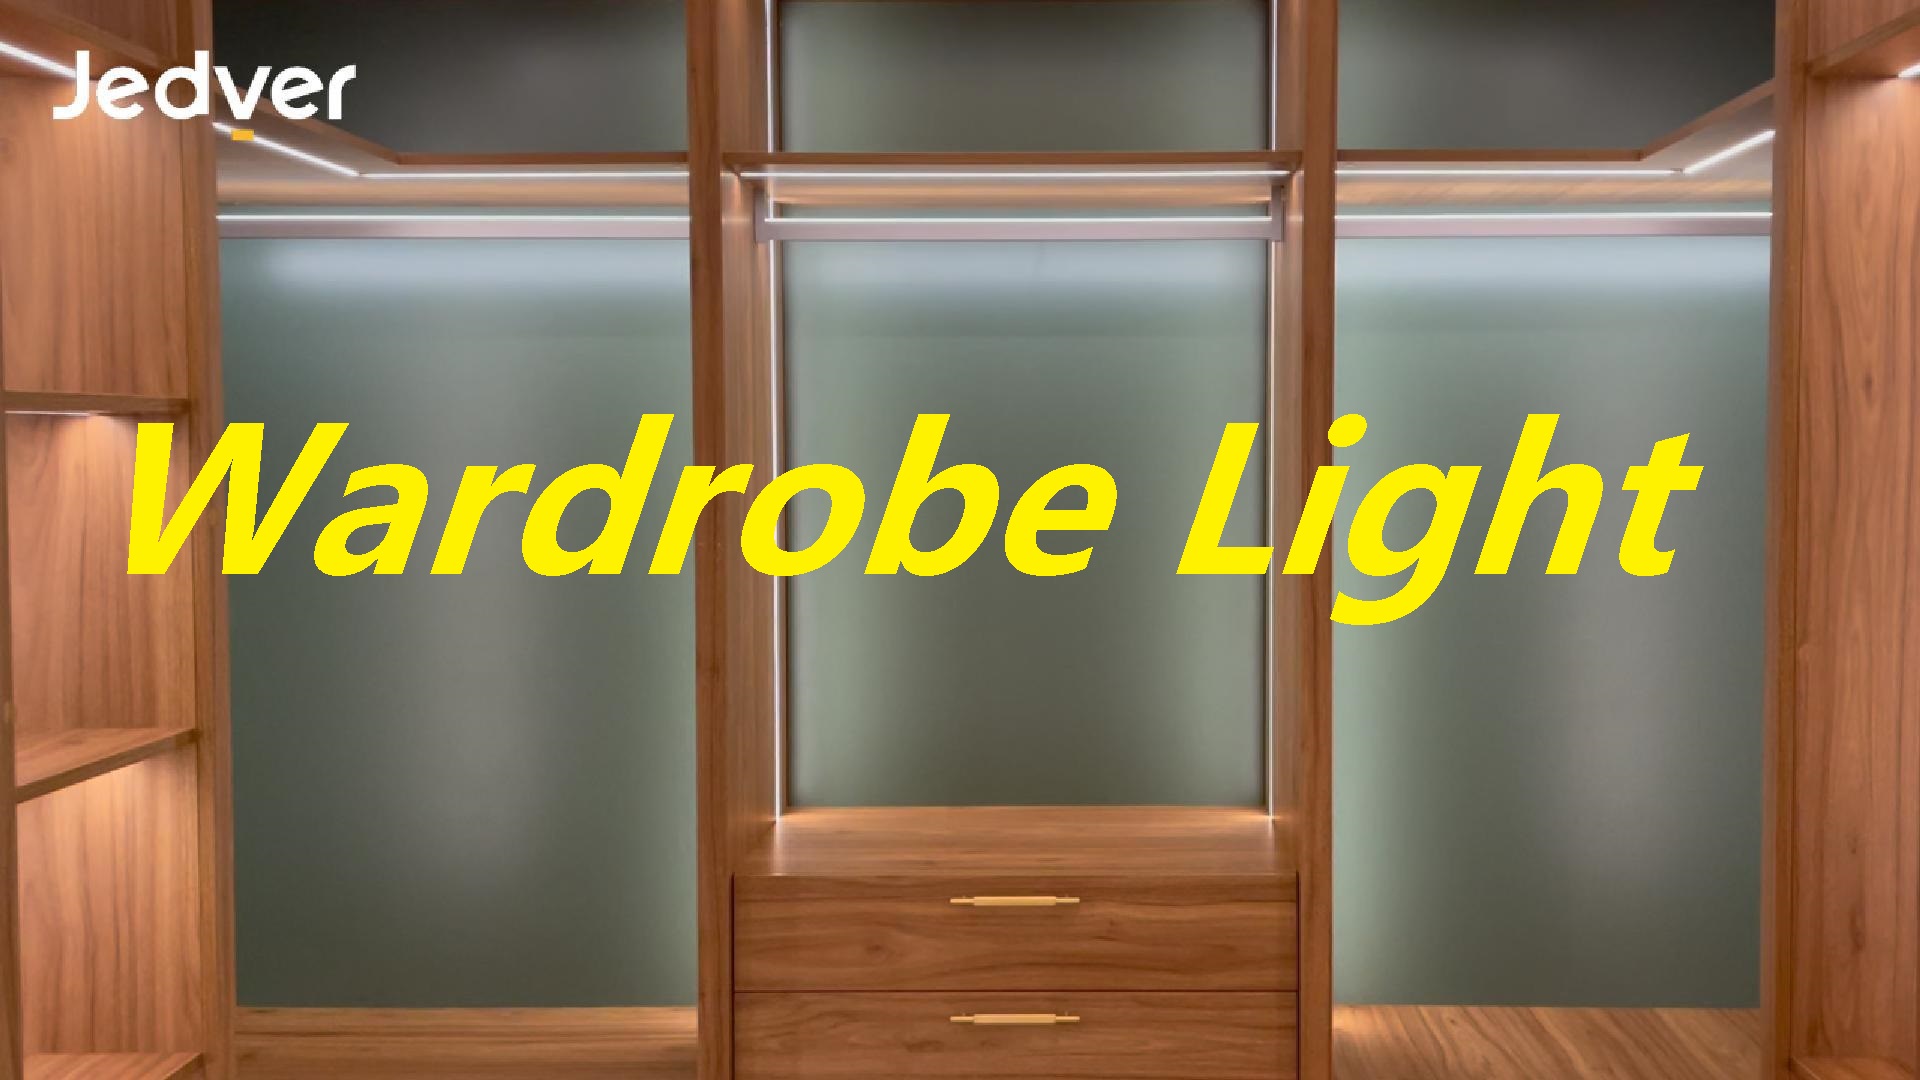 Tackling Wardrobe Lighting Woes: Jedver's Integrated Wardrobe Lights Offer the Ultimate Solution